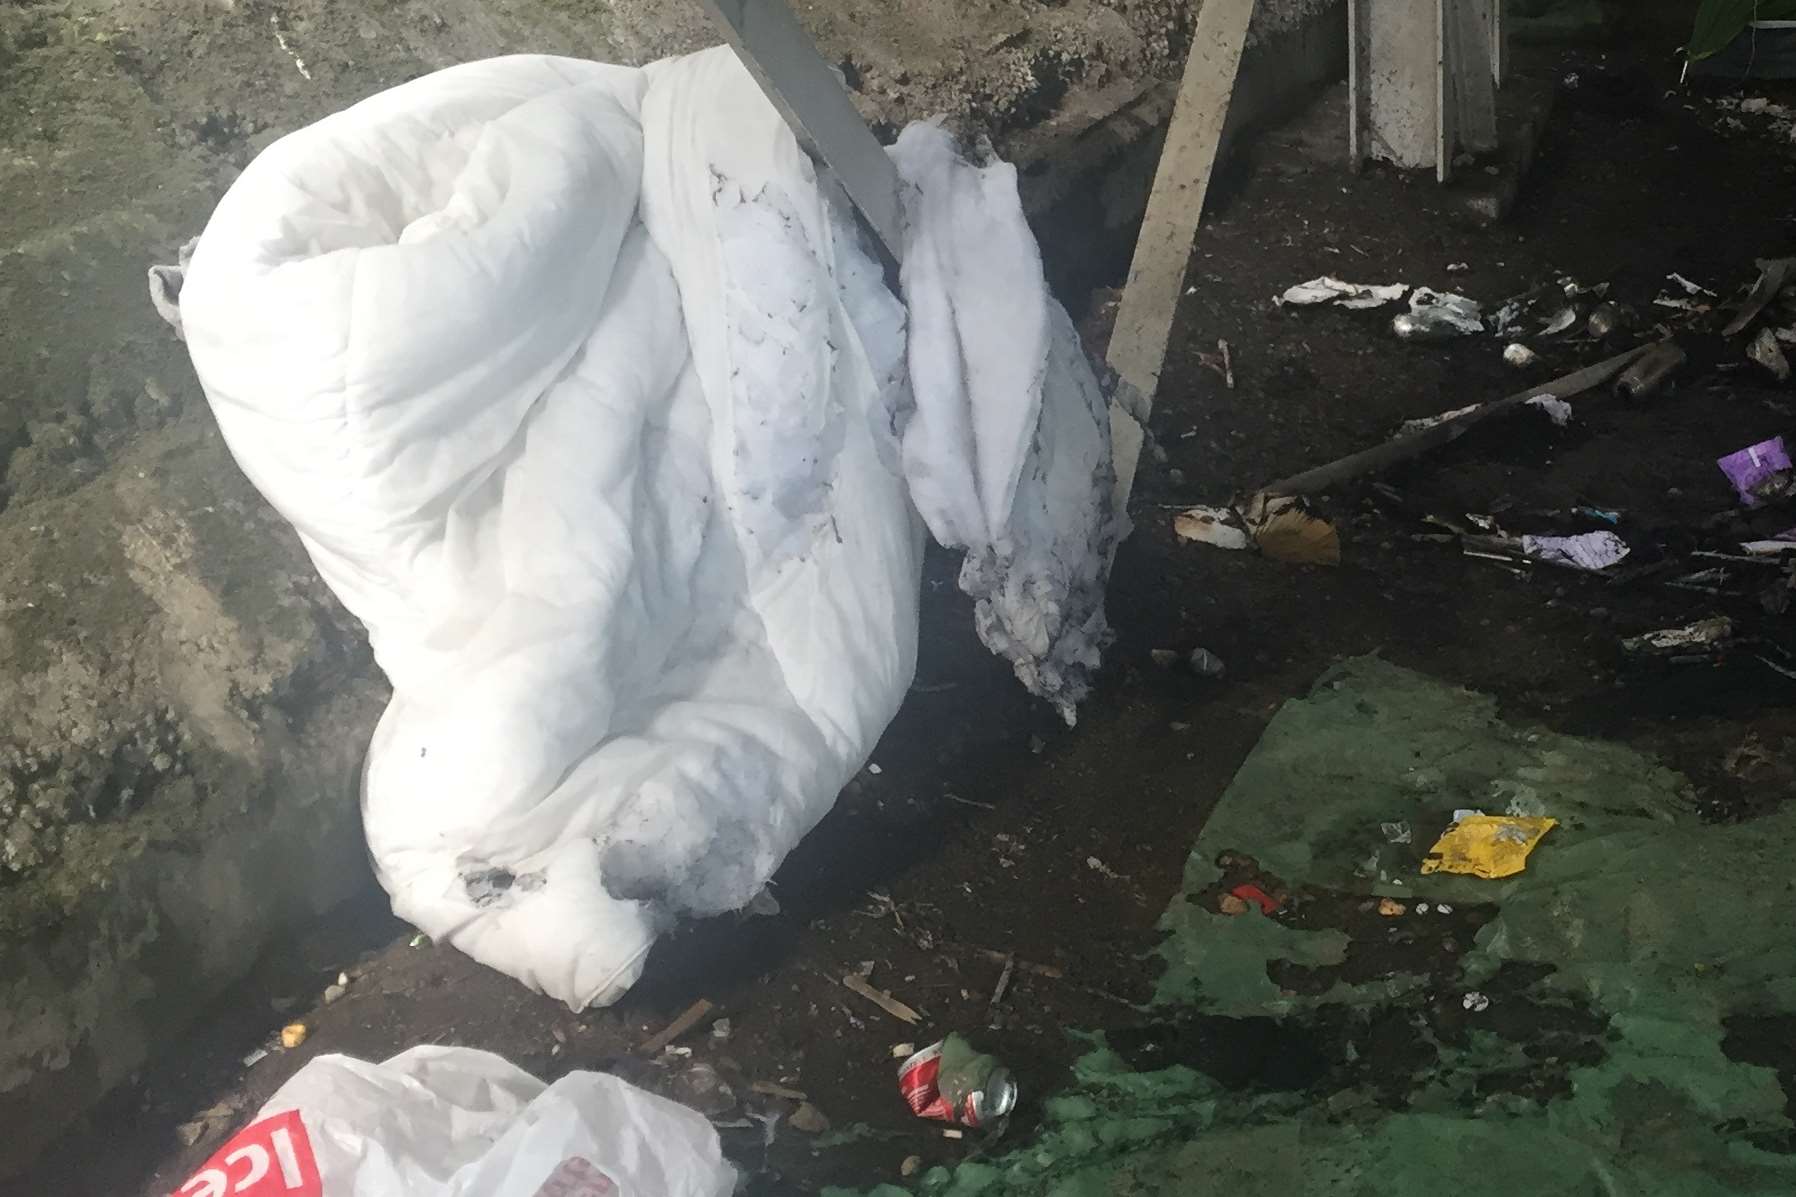 A duvet is saved from the blaze under the multi-storey car park